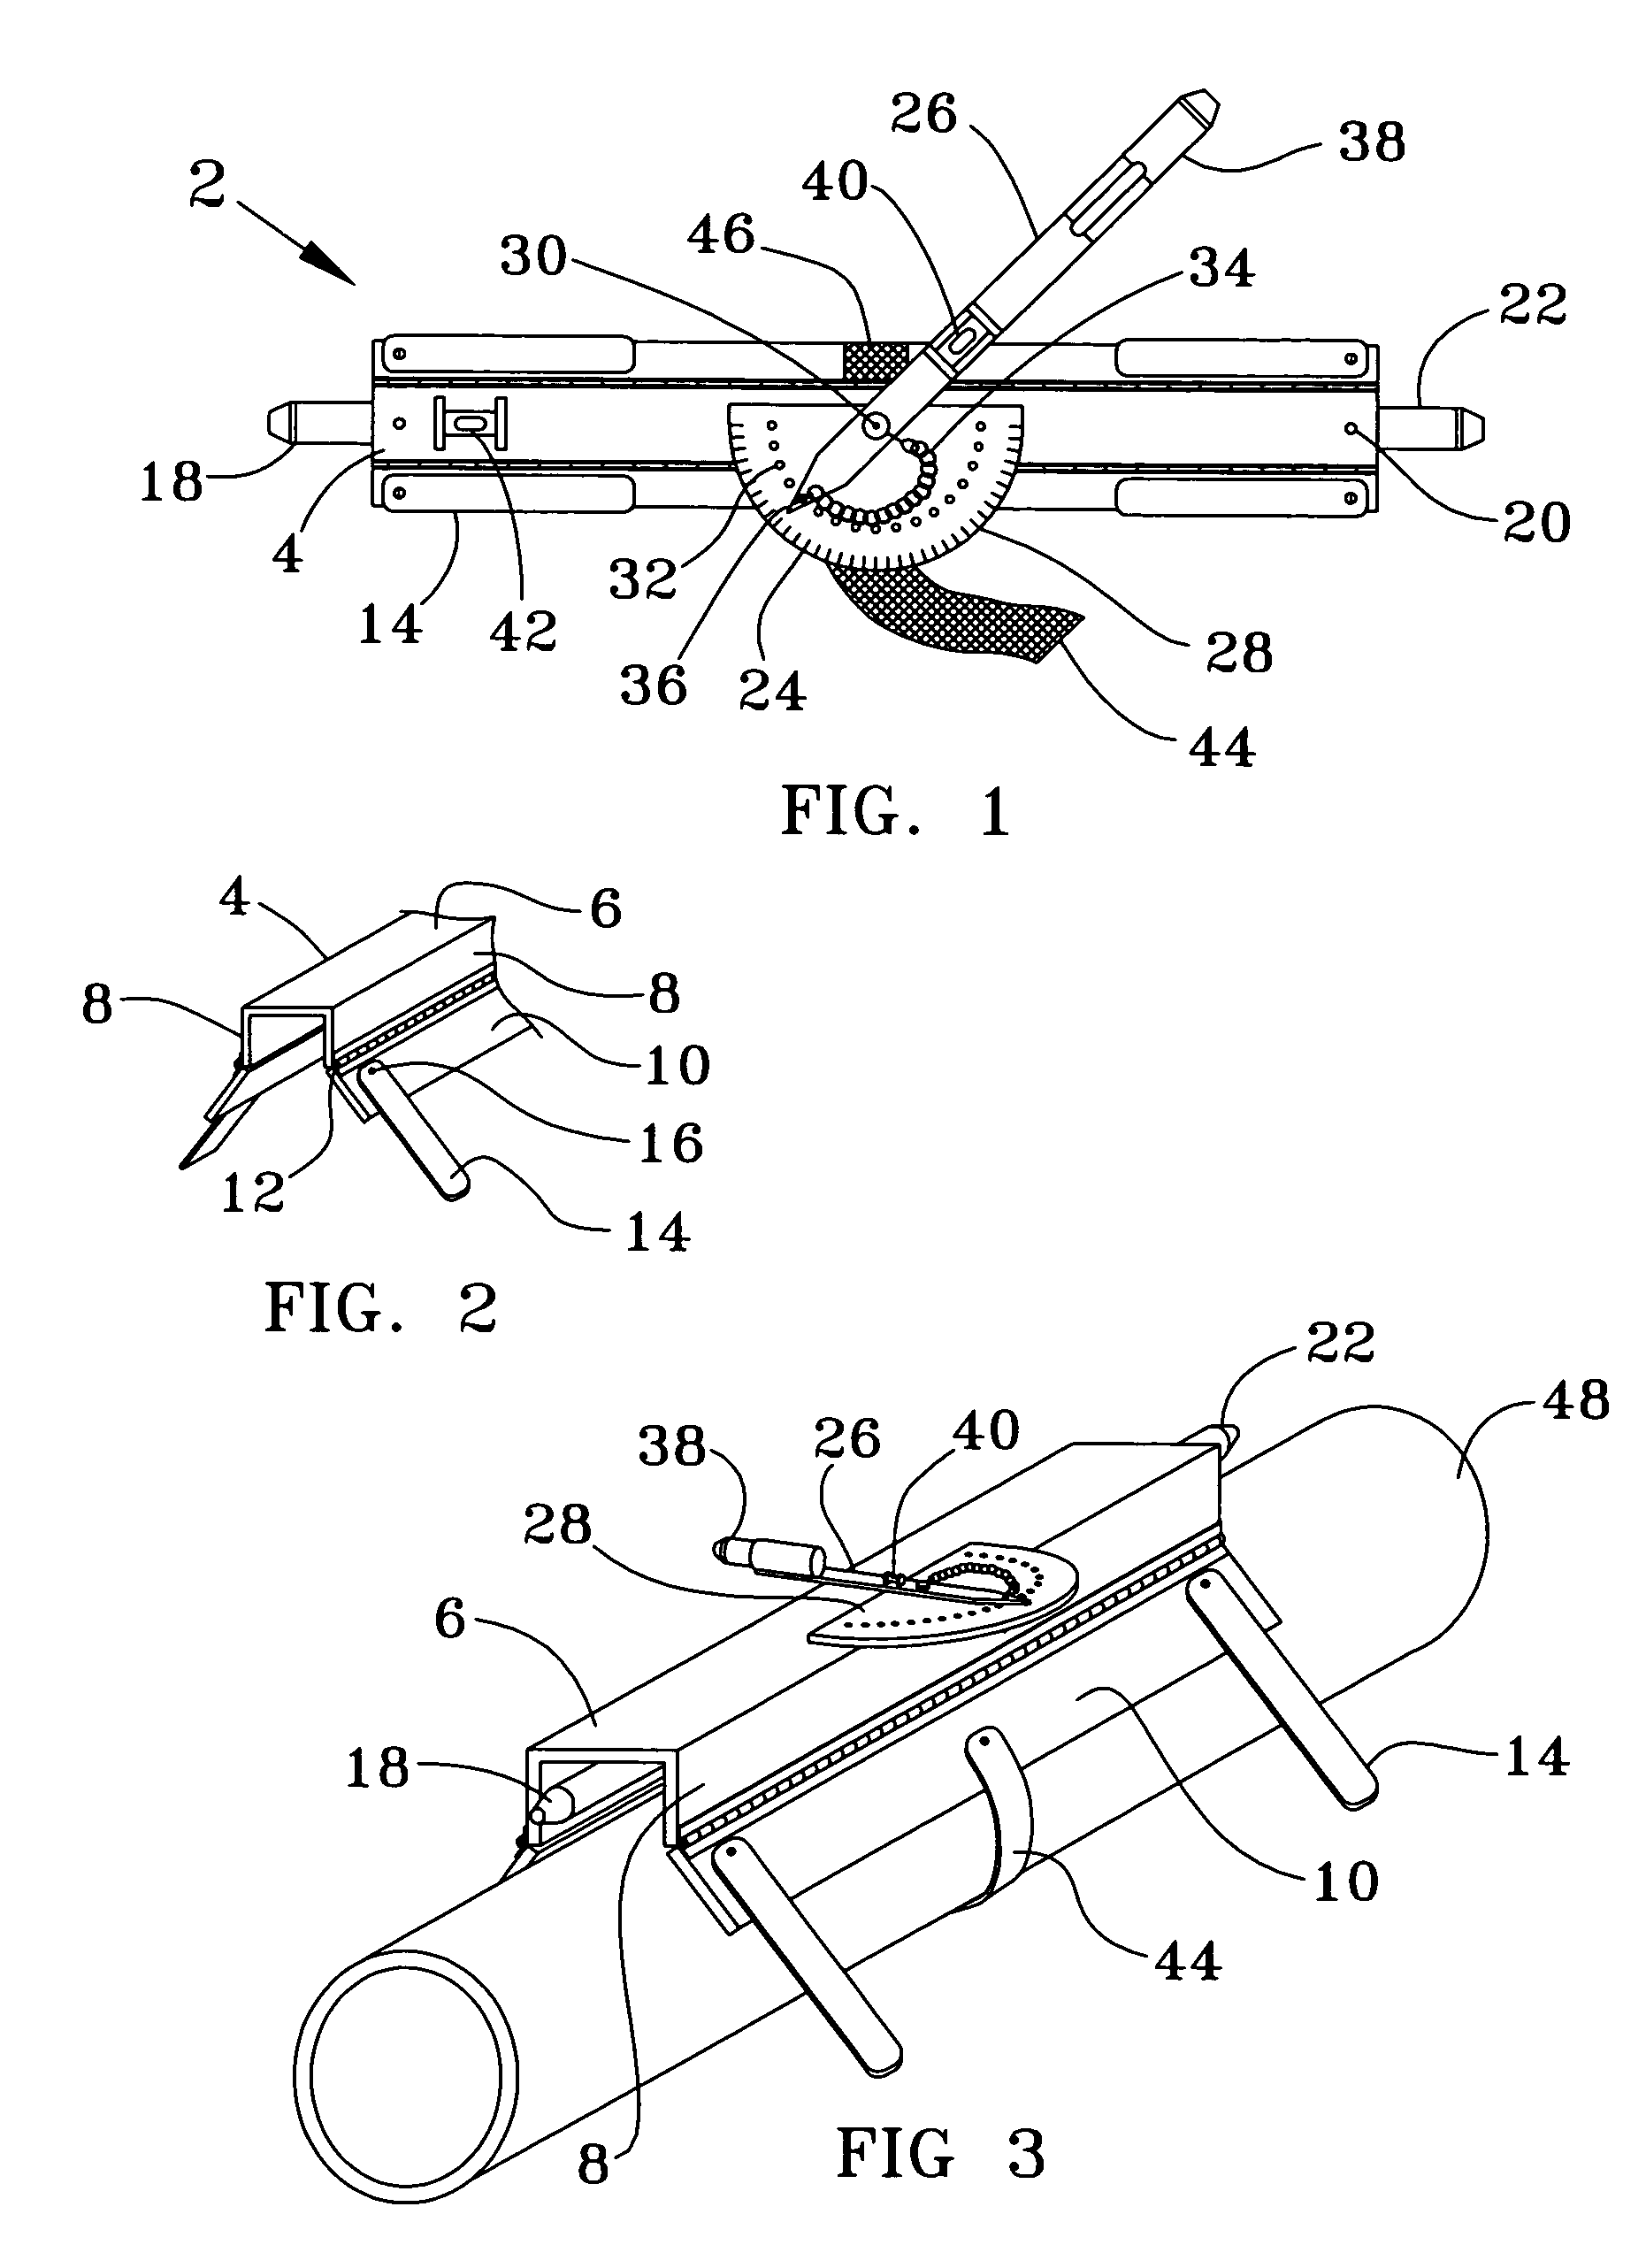 Pipe sizing and alignment device